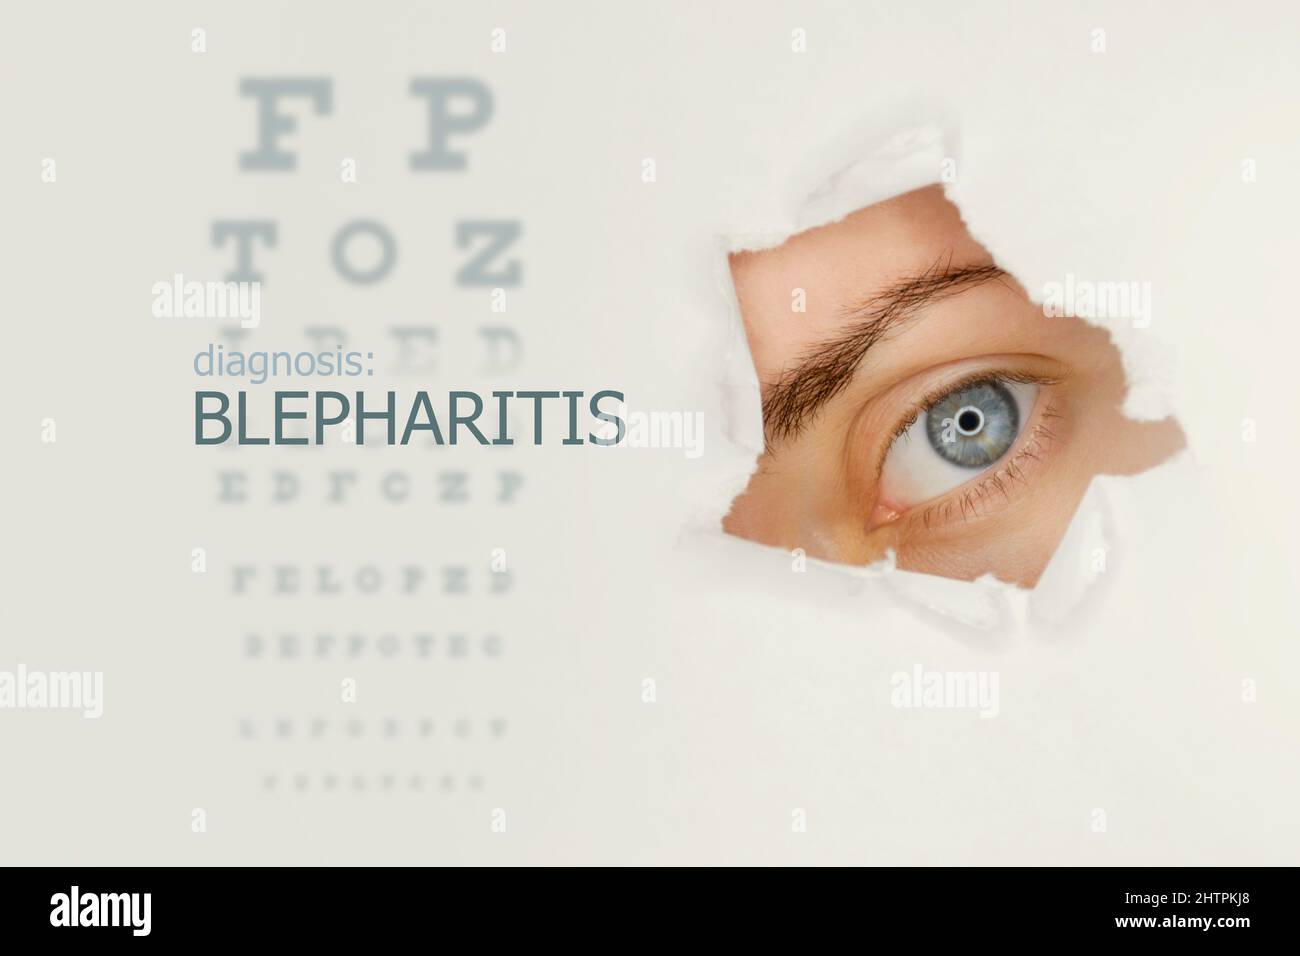 Blepharitis disease poster with eye test and blue eye on  right. Studio grey background Stock Photo